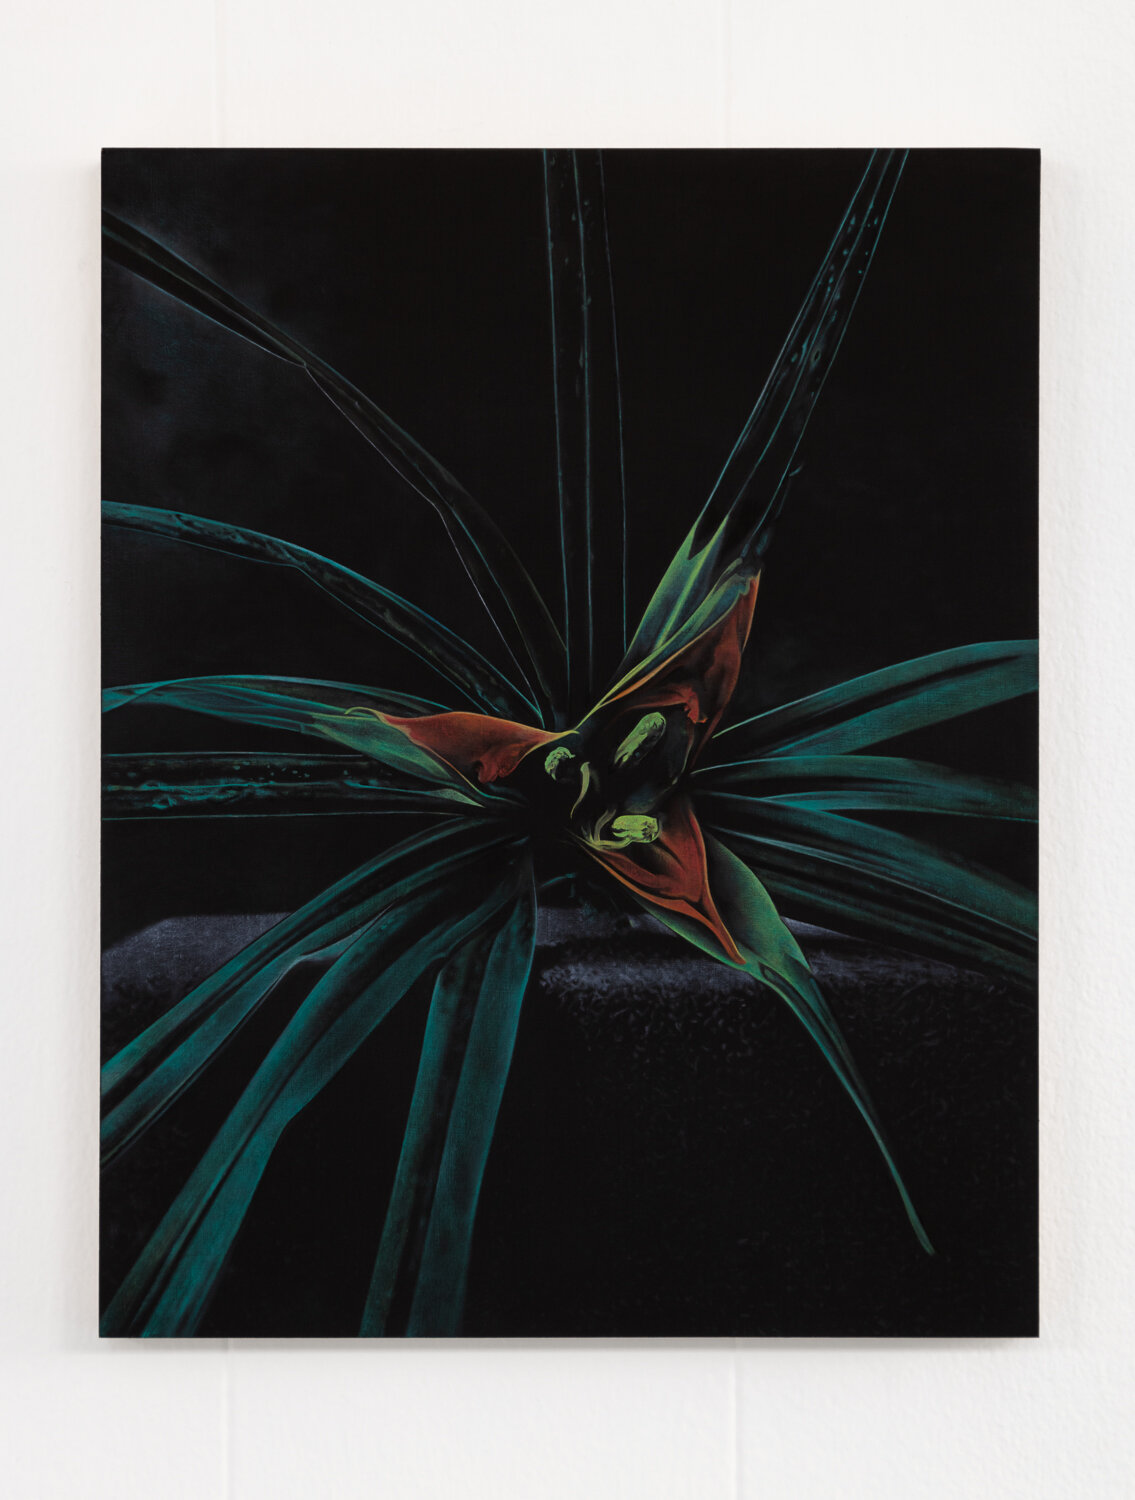  Becca Mann,  Pandanus , 2019. Oil and flashe on panel, 11x14 inches.         